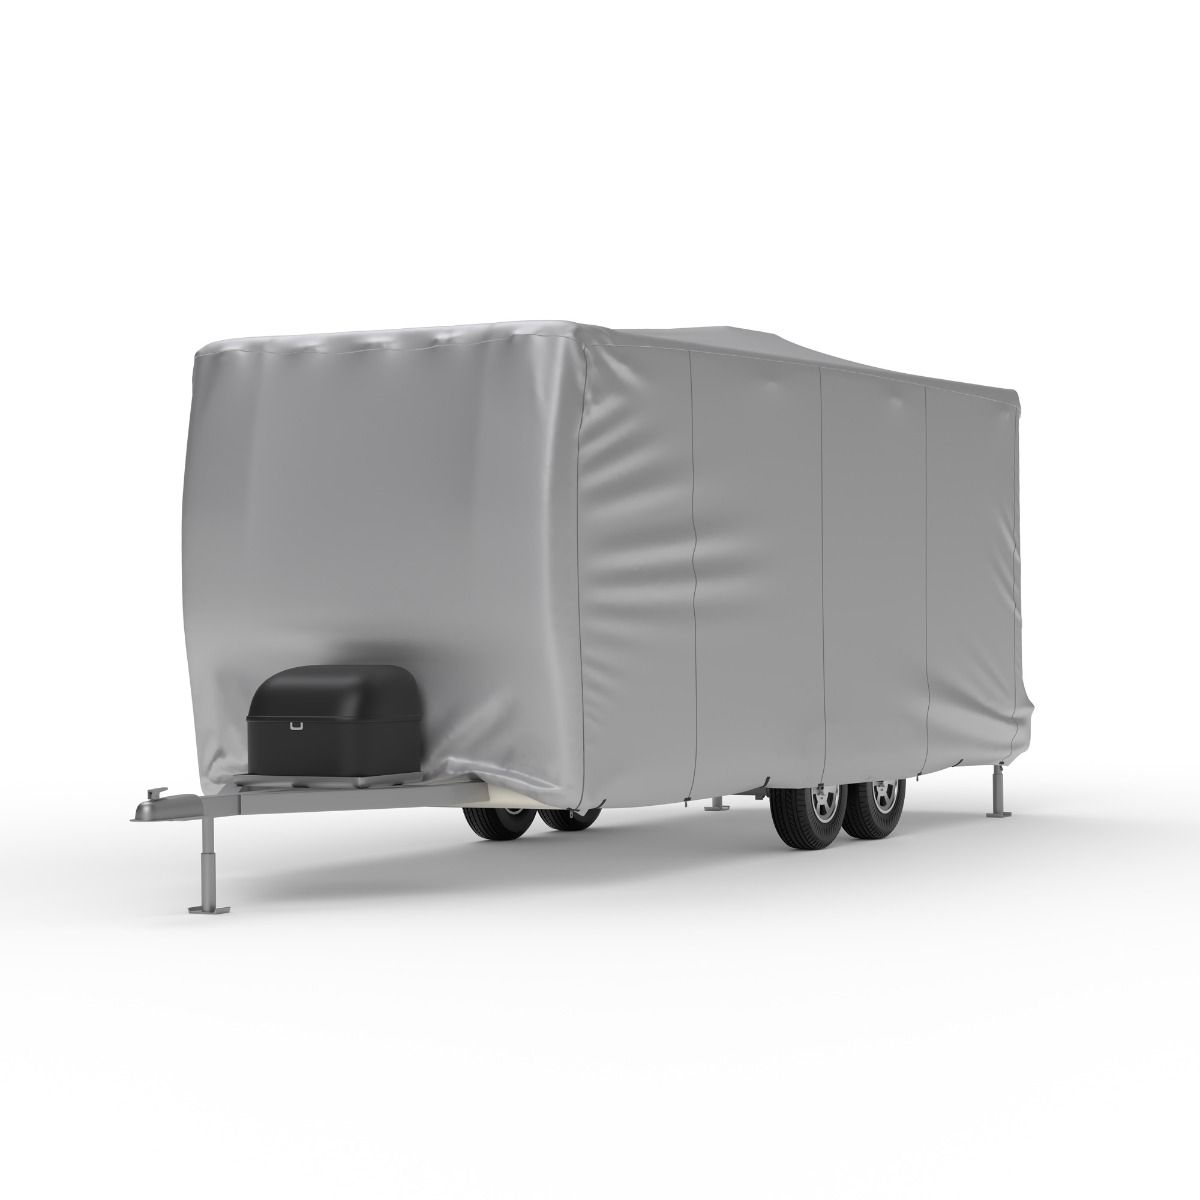 Platinum Shield Travel Trailer RV Cover (Fits 20.5' to 22.5' Long)